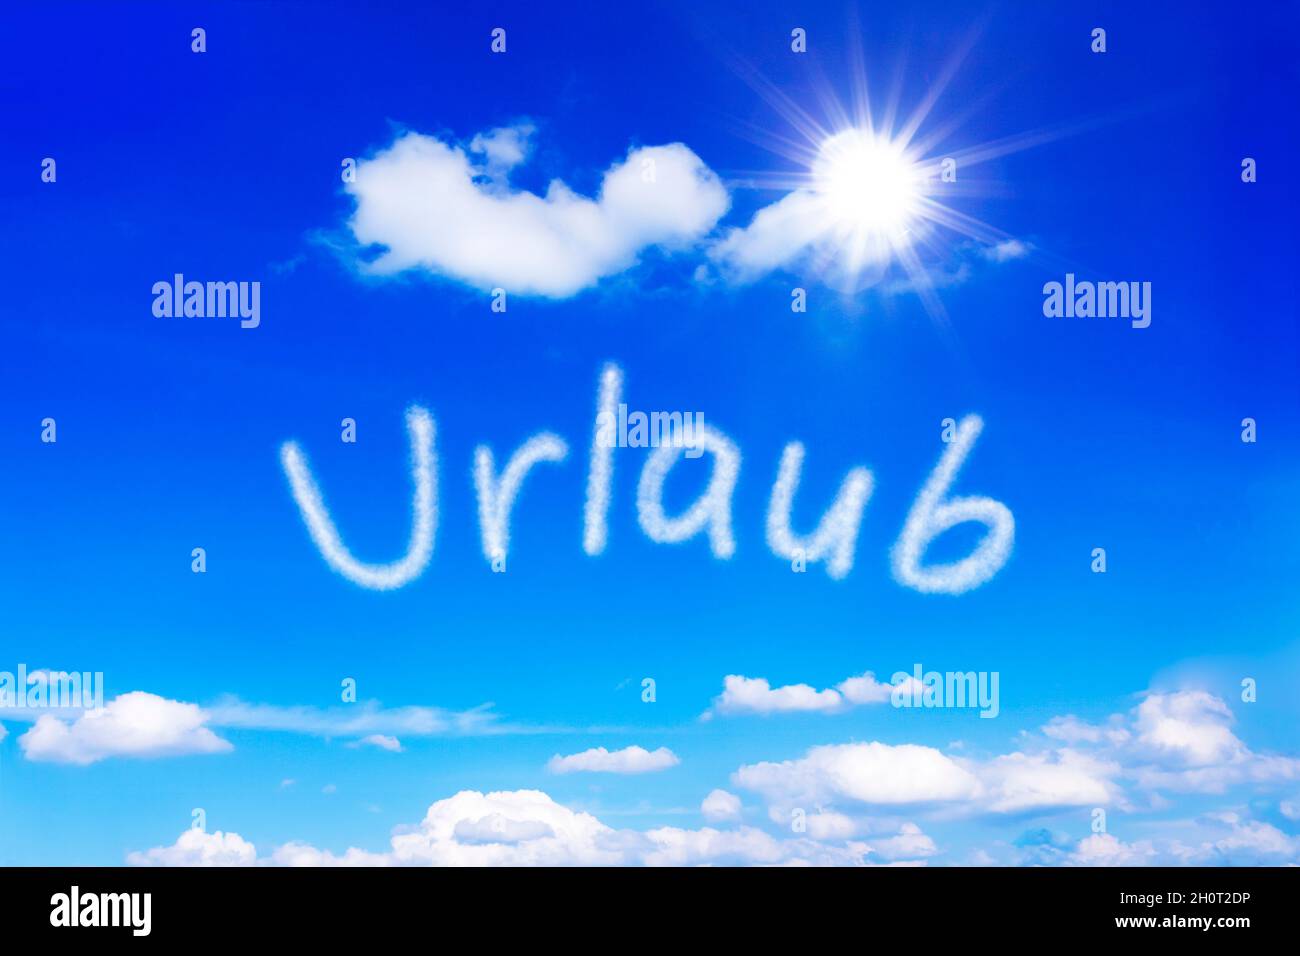 German word Urlaub, meaning vacation, written on a sunny blue sky. Symbol for dreaming of warm and carefree summer days with endless sun. Stock Photo